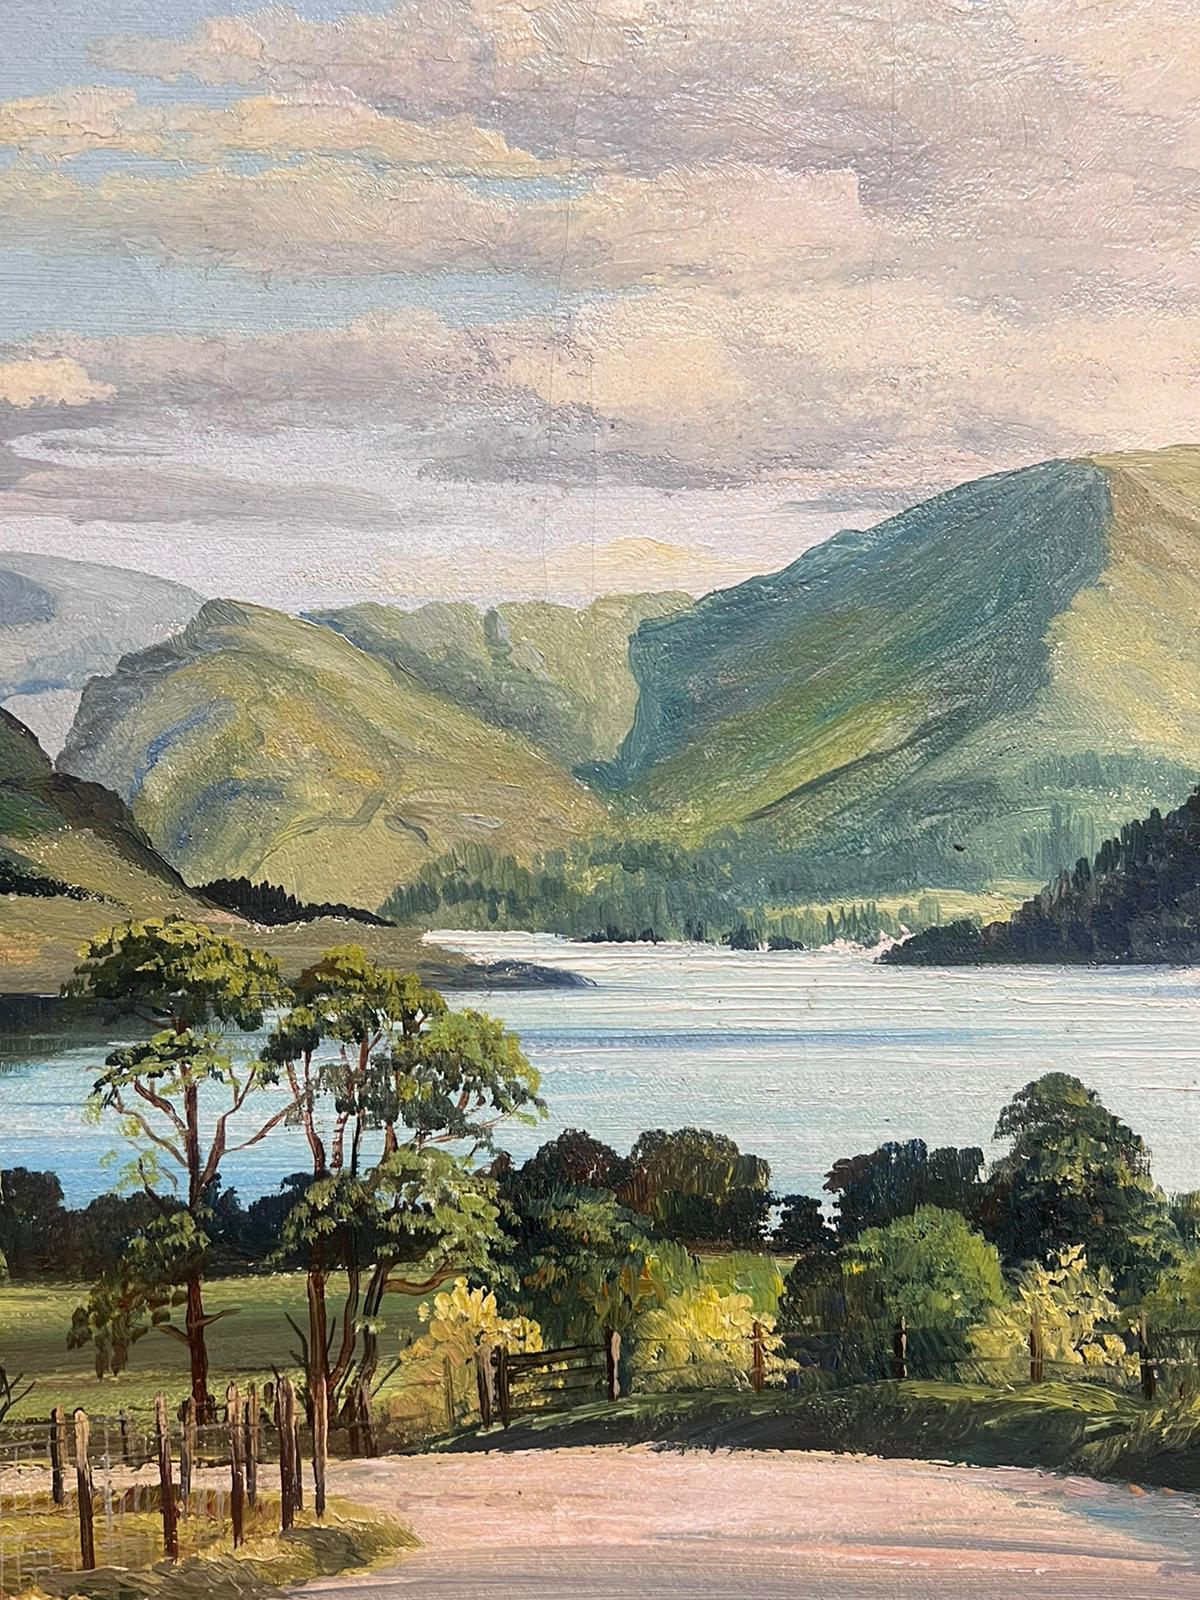 Ullswater The English Lake District Large Signed Vintage Oil Painting on Canvas 3